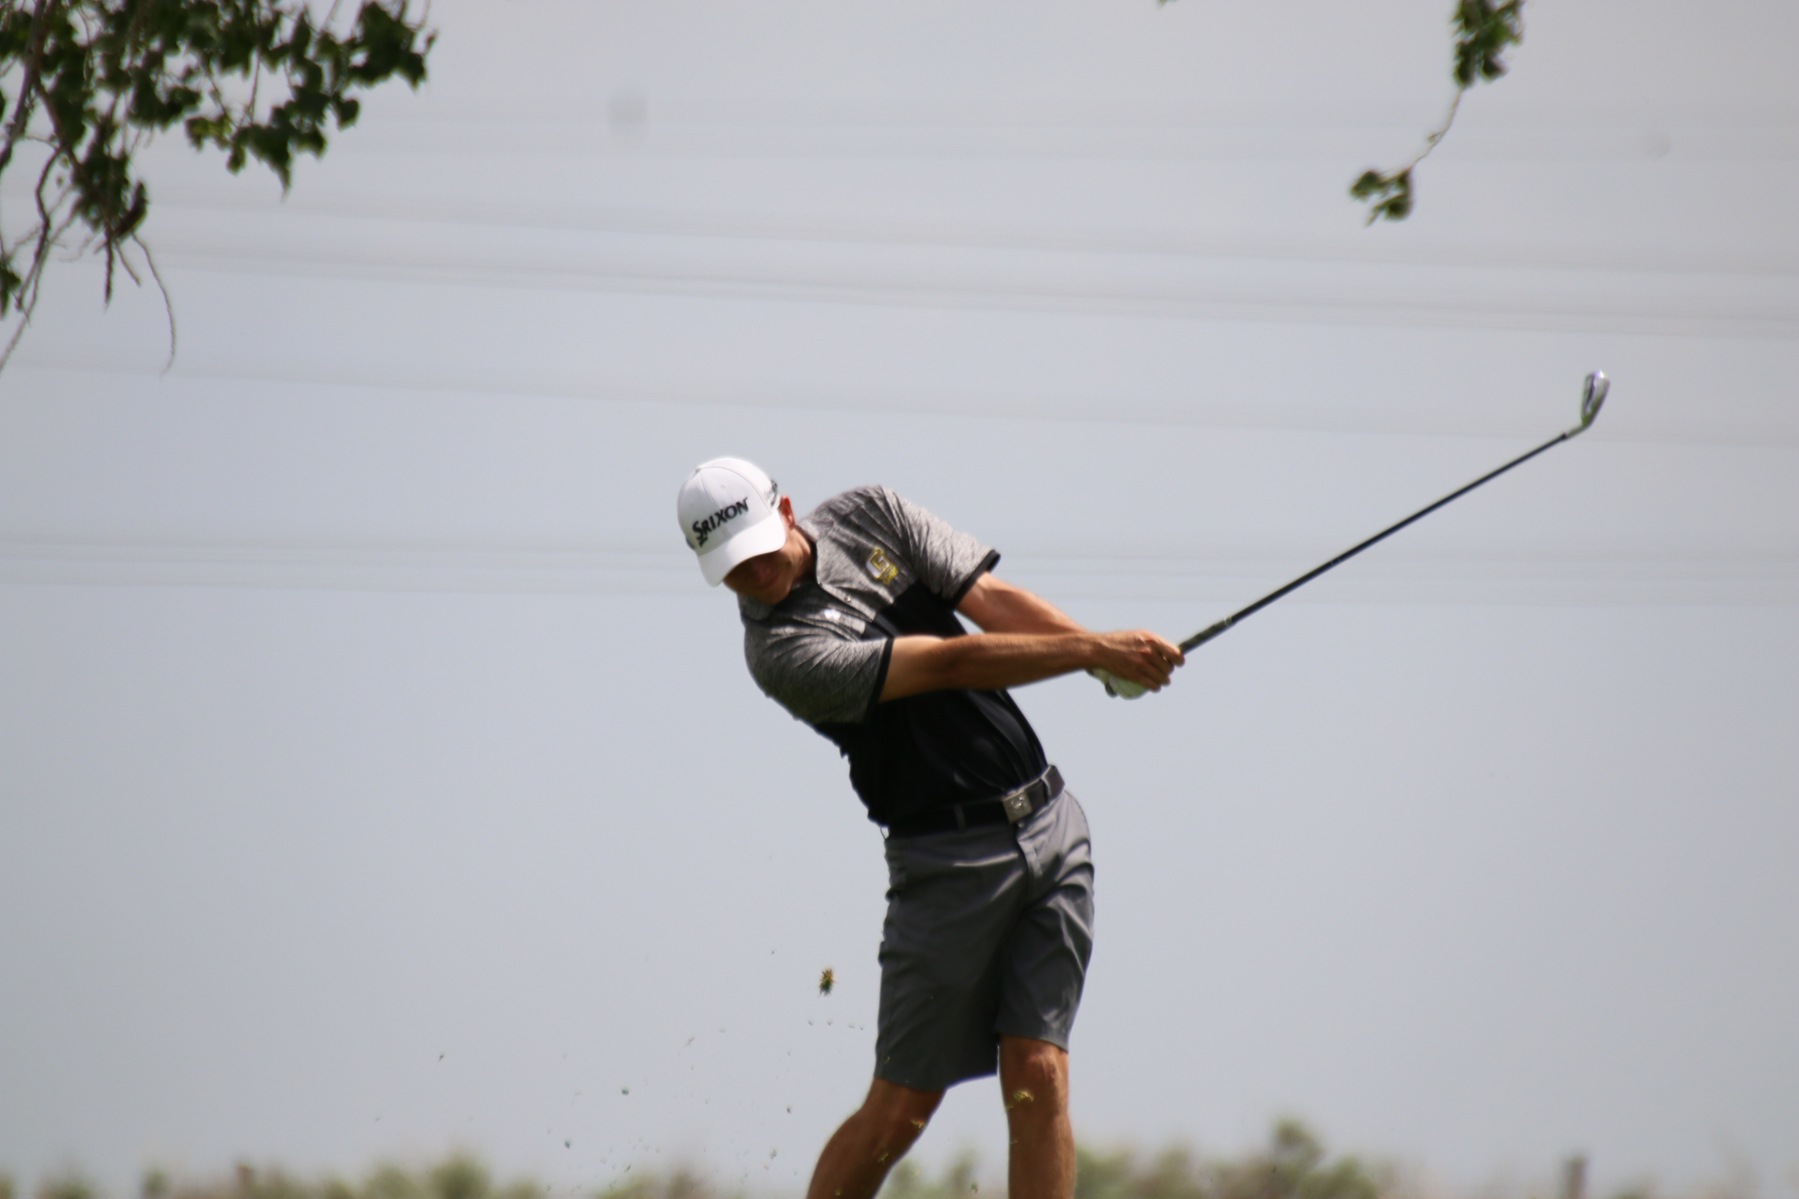 Broncbusters fourth in Wichita; Bay places second